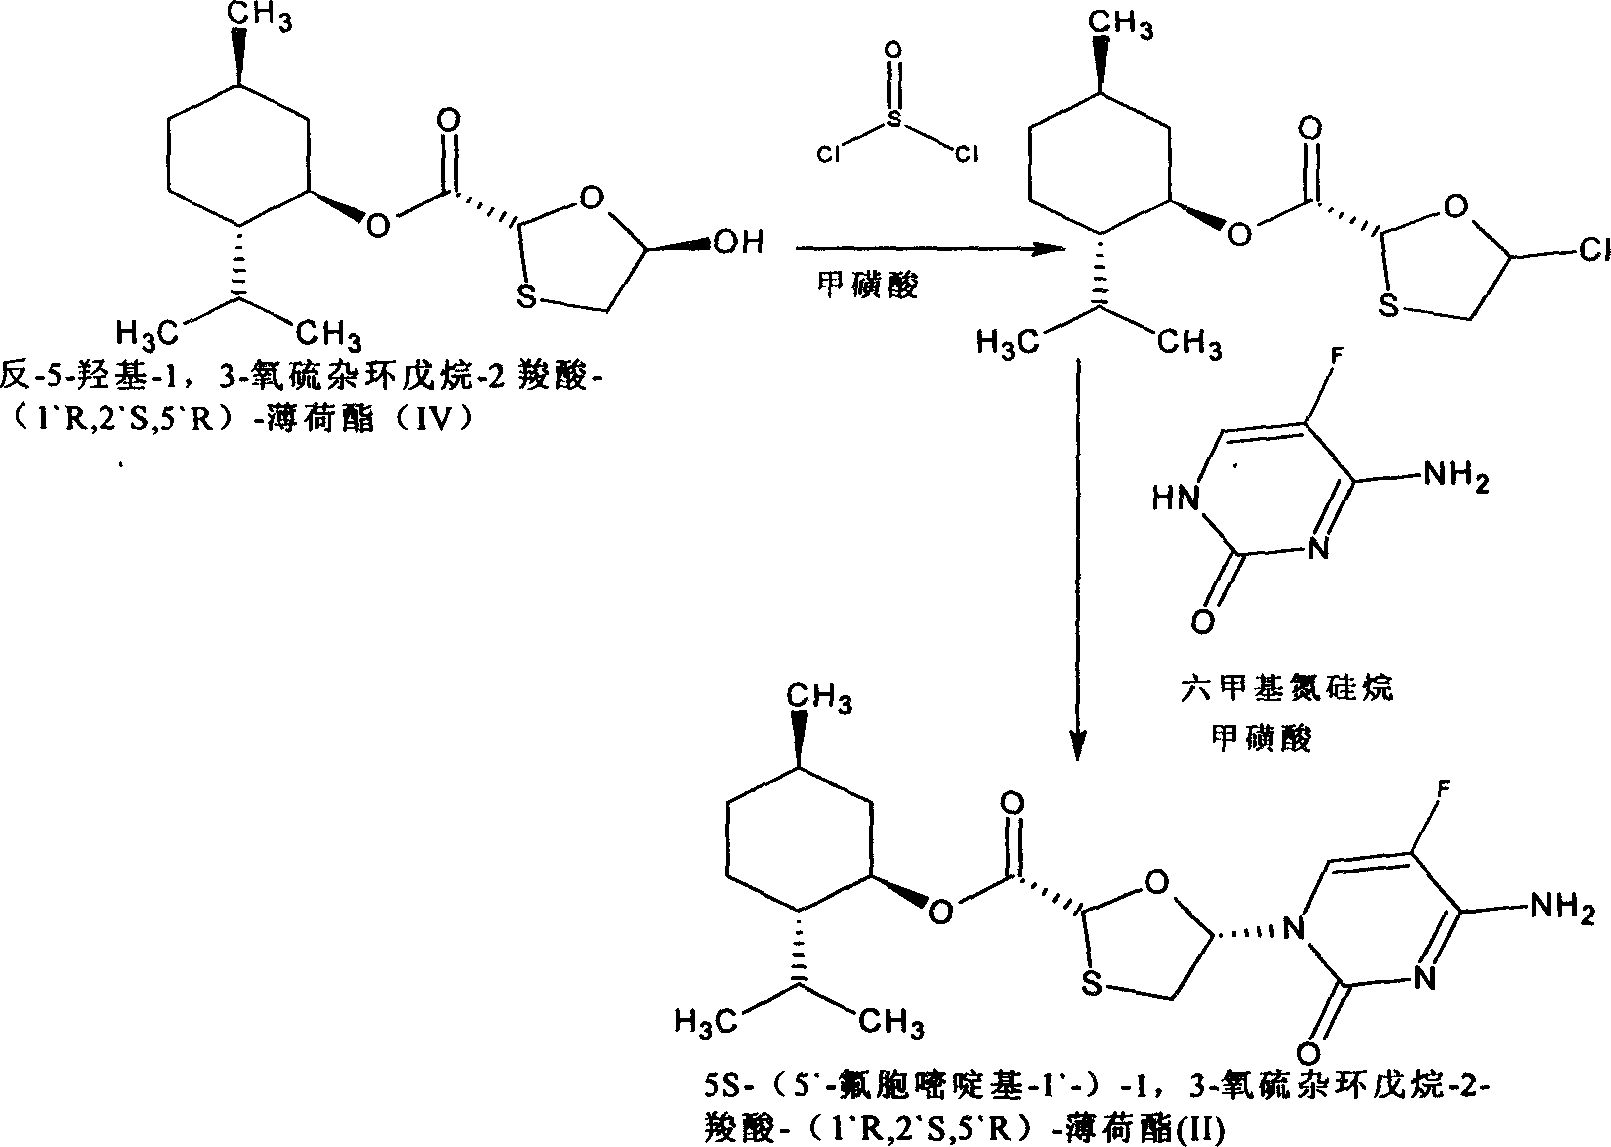 Suitqable to industrialized method for preparing emtricitabine